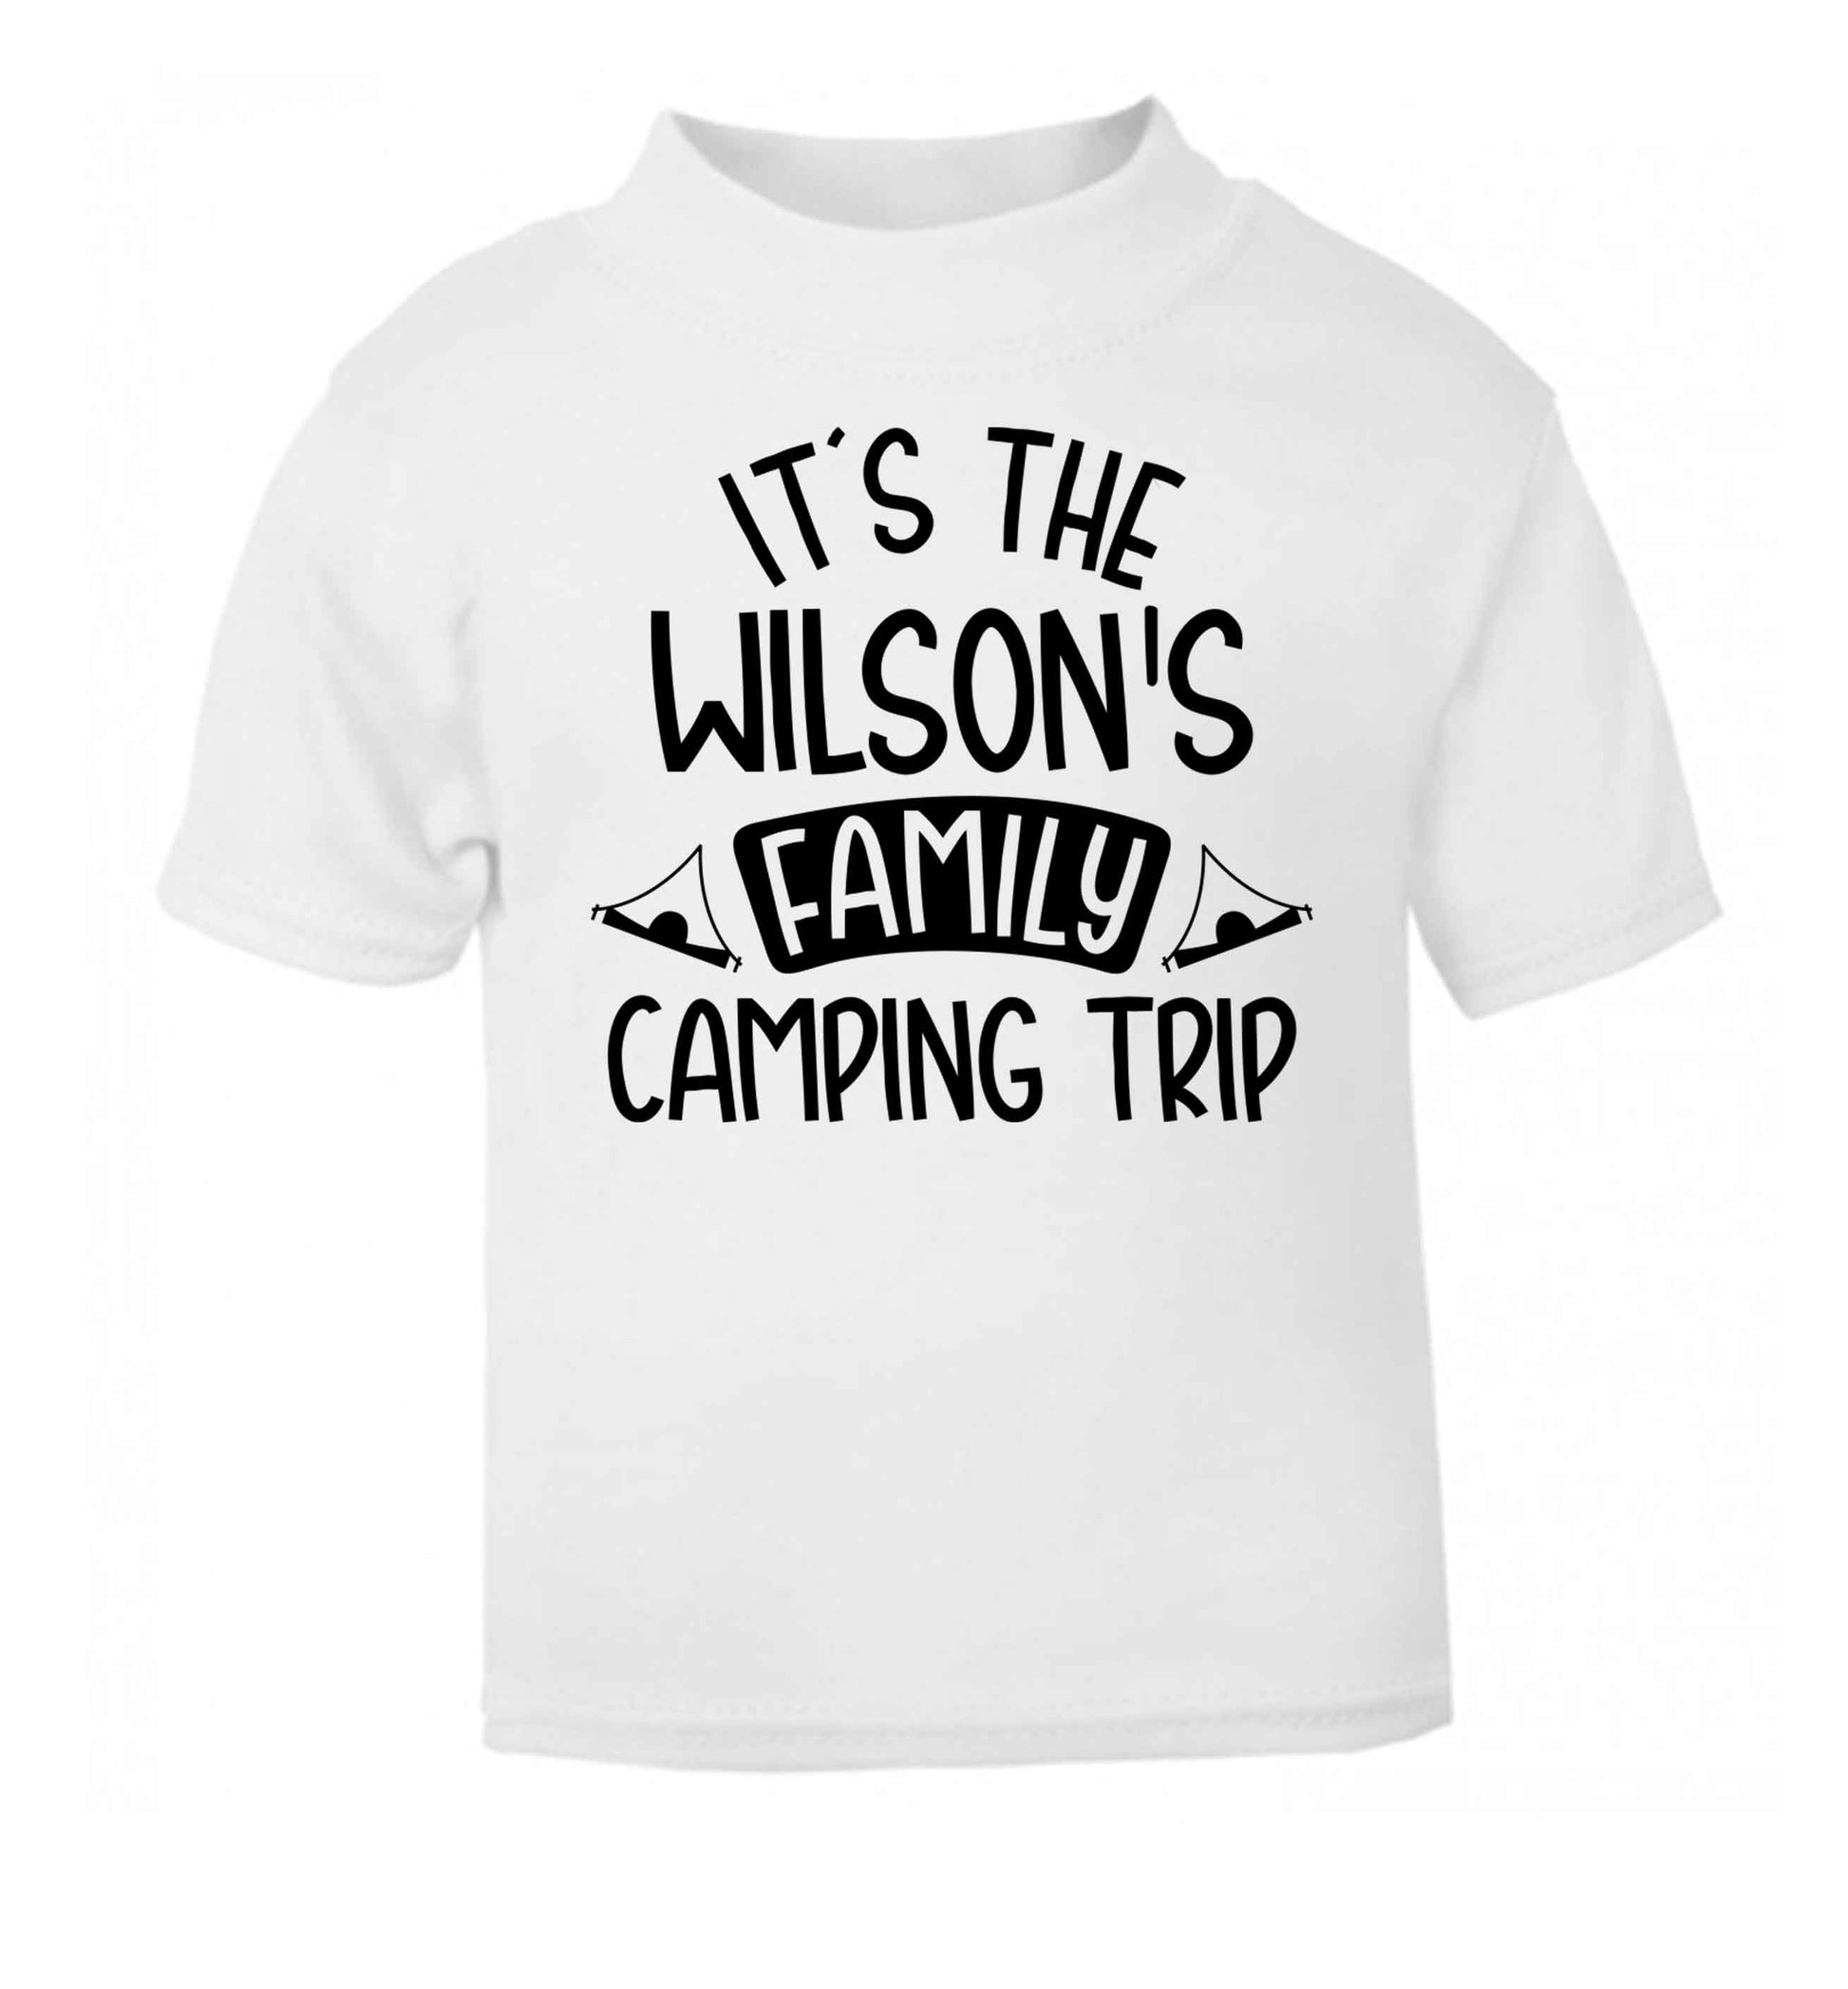 It's the Wilson's family camping trip personalised white Baby Toddler Tshirt 2 Years